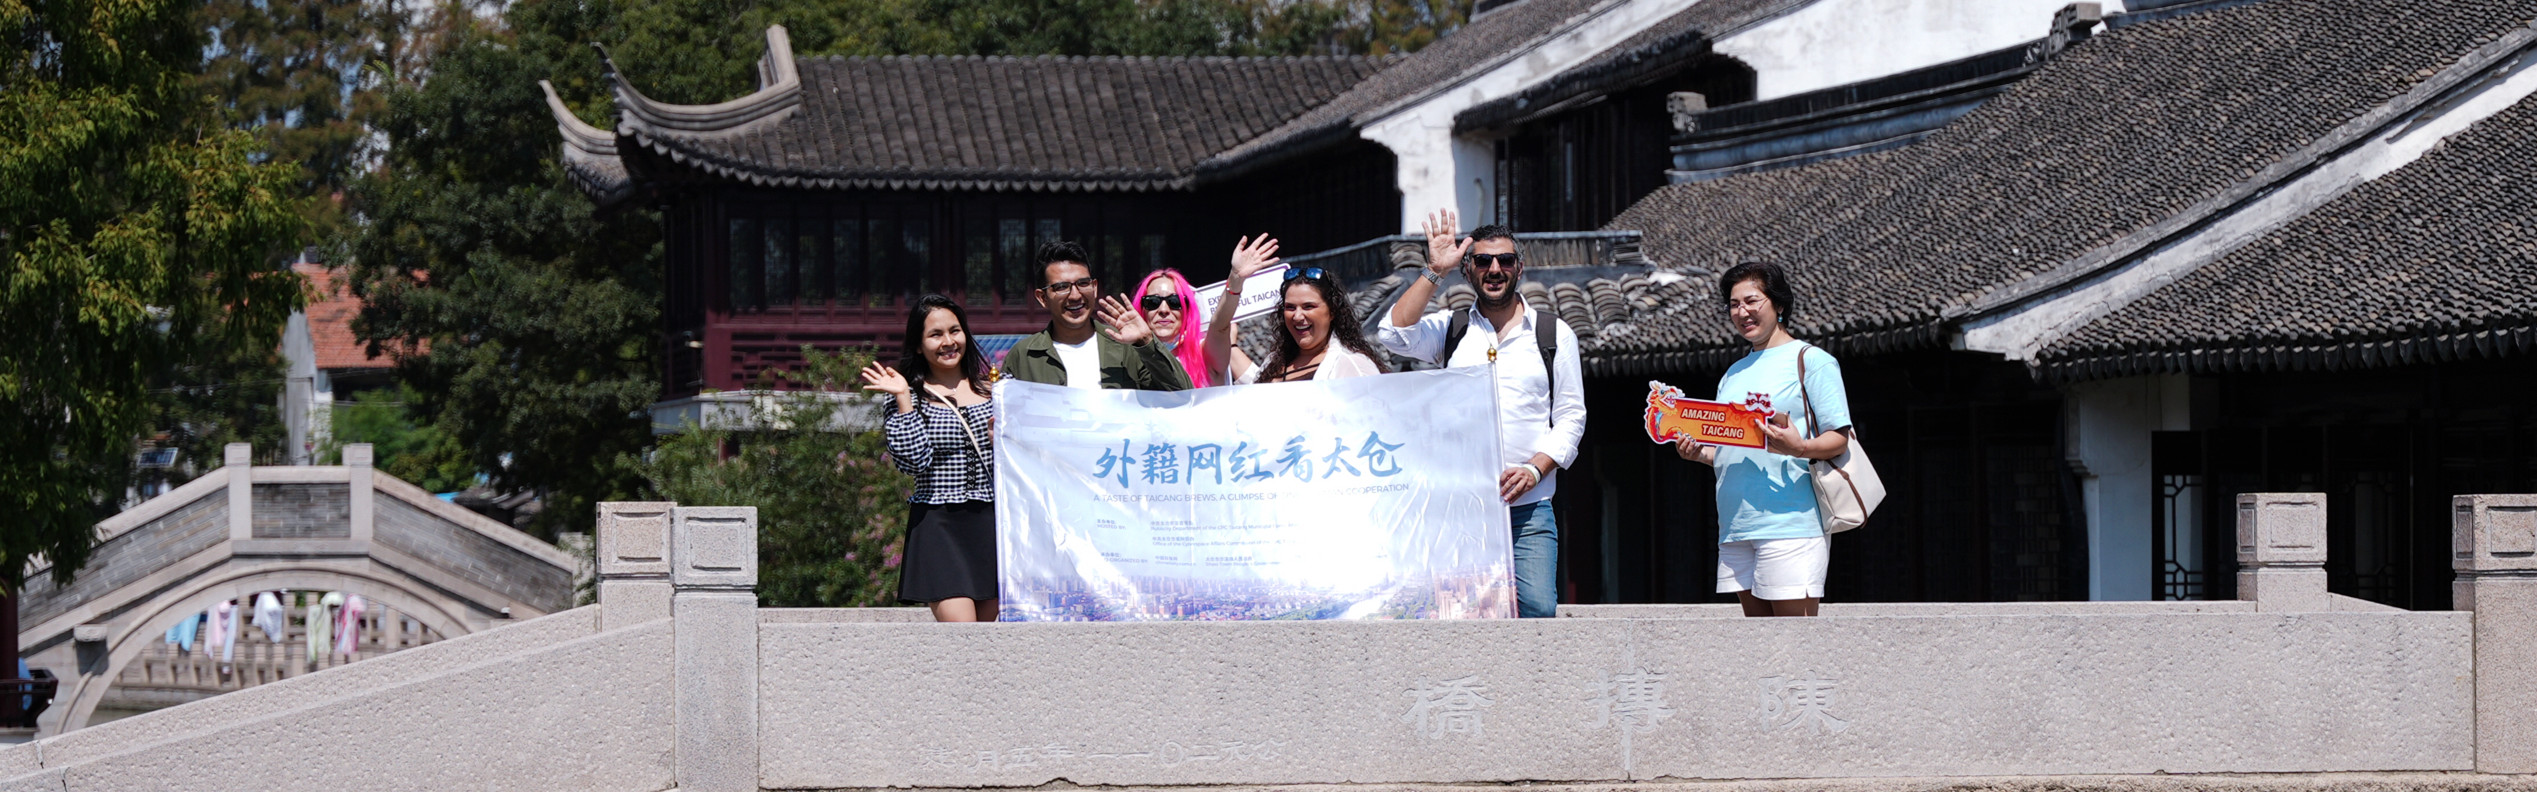 Experience Taicang's global feel with foreigners